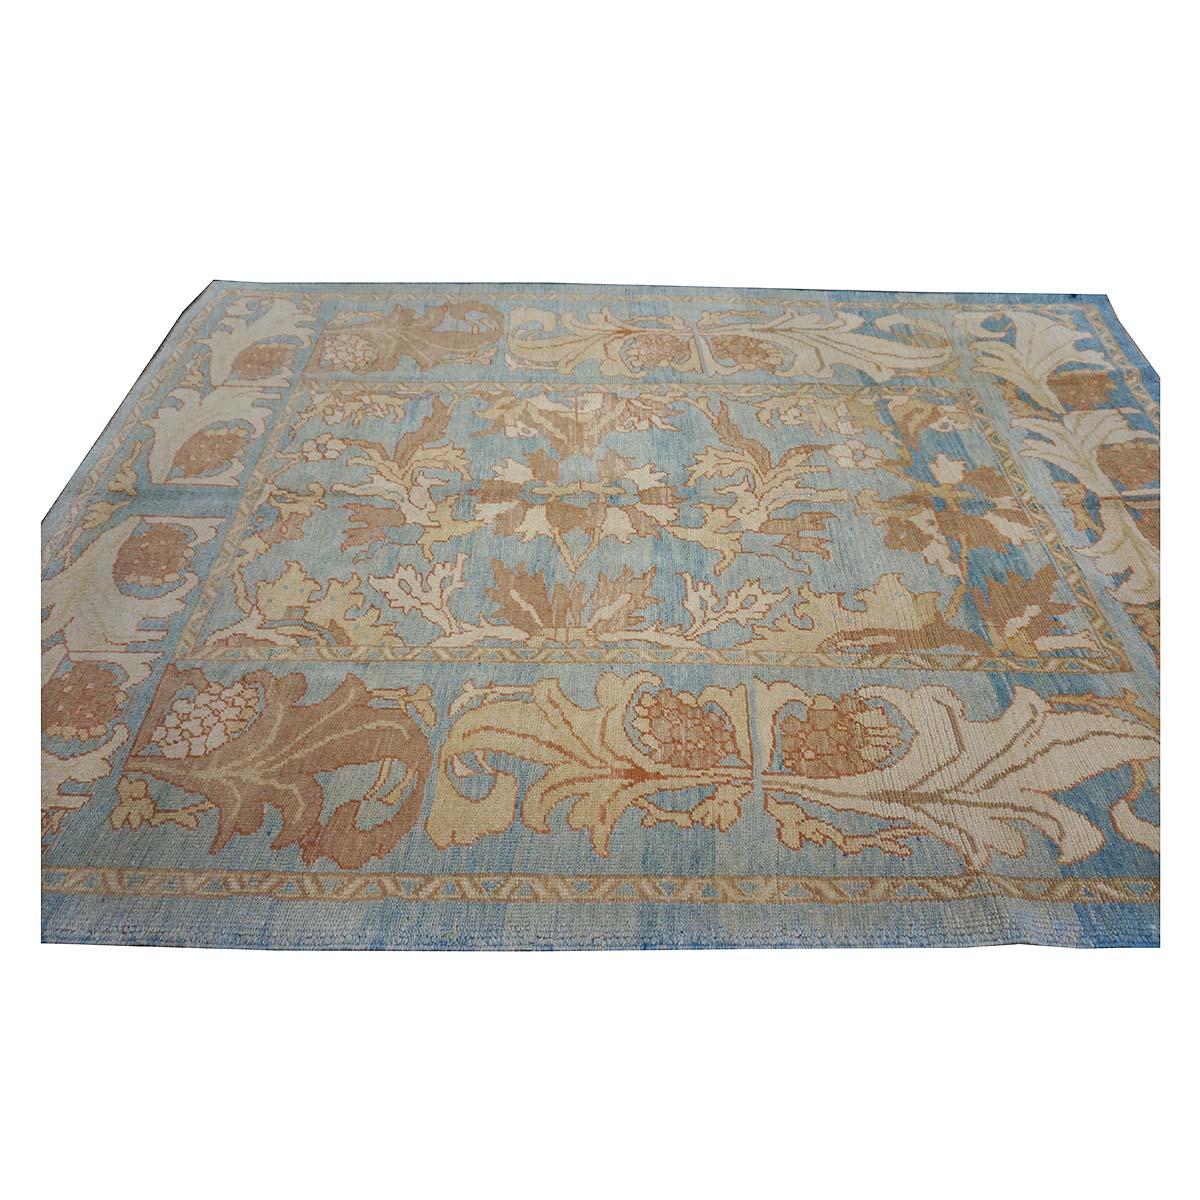 Wool 21st Century Turkish Donegal Oushak 8x11 Blue, Ivory, & Clay Handmade Area Rug For Sale